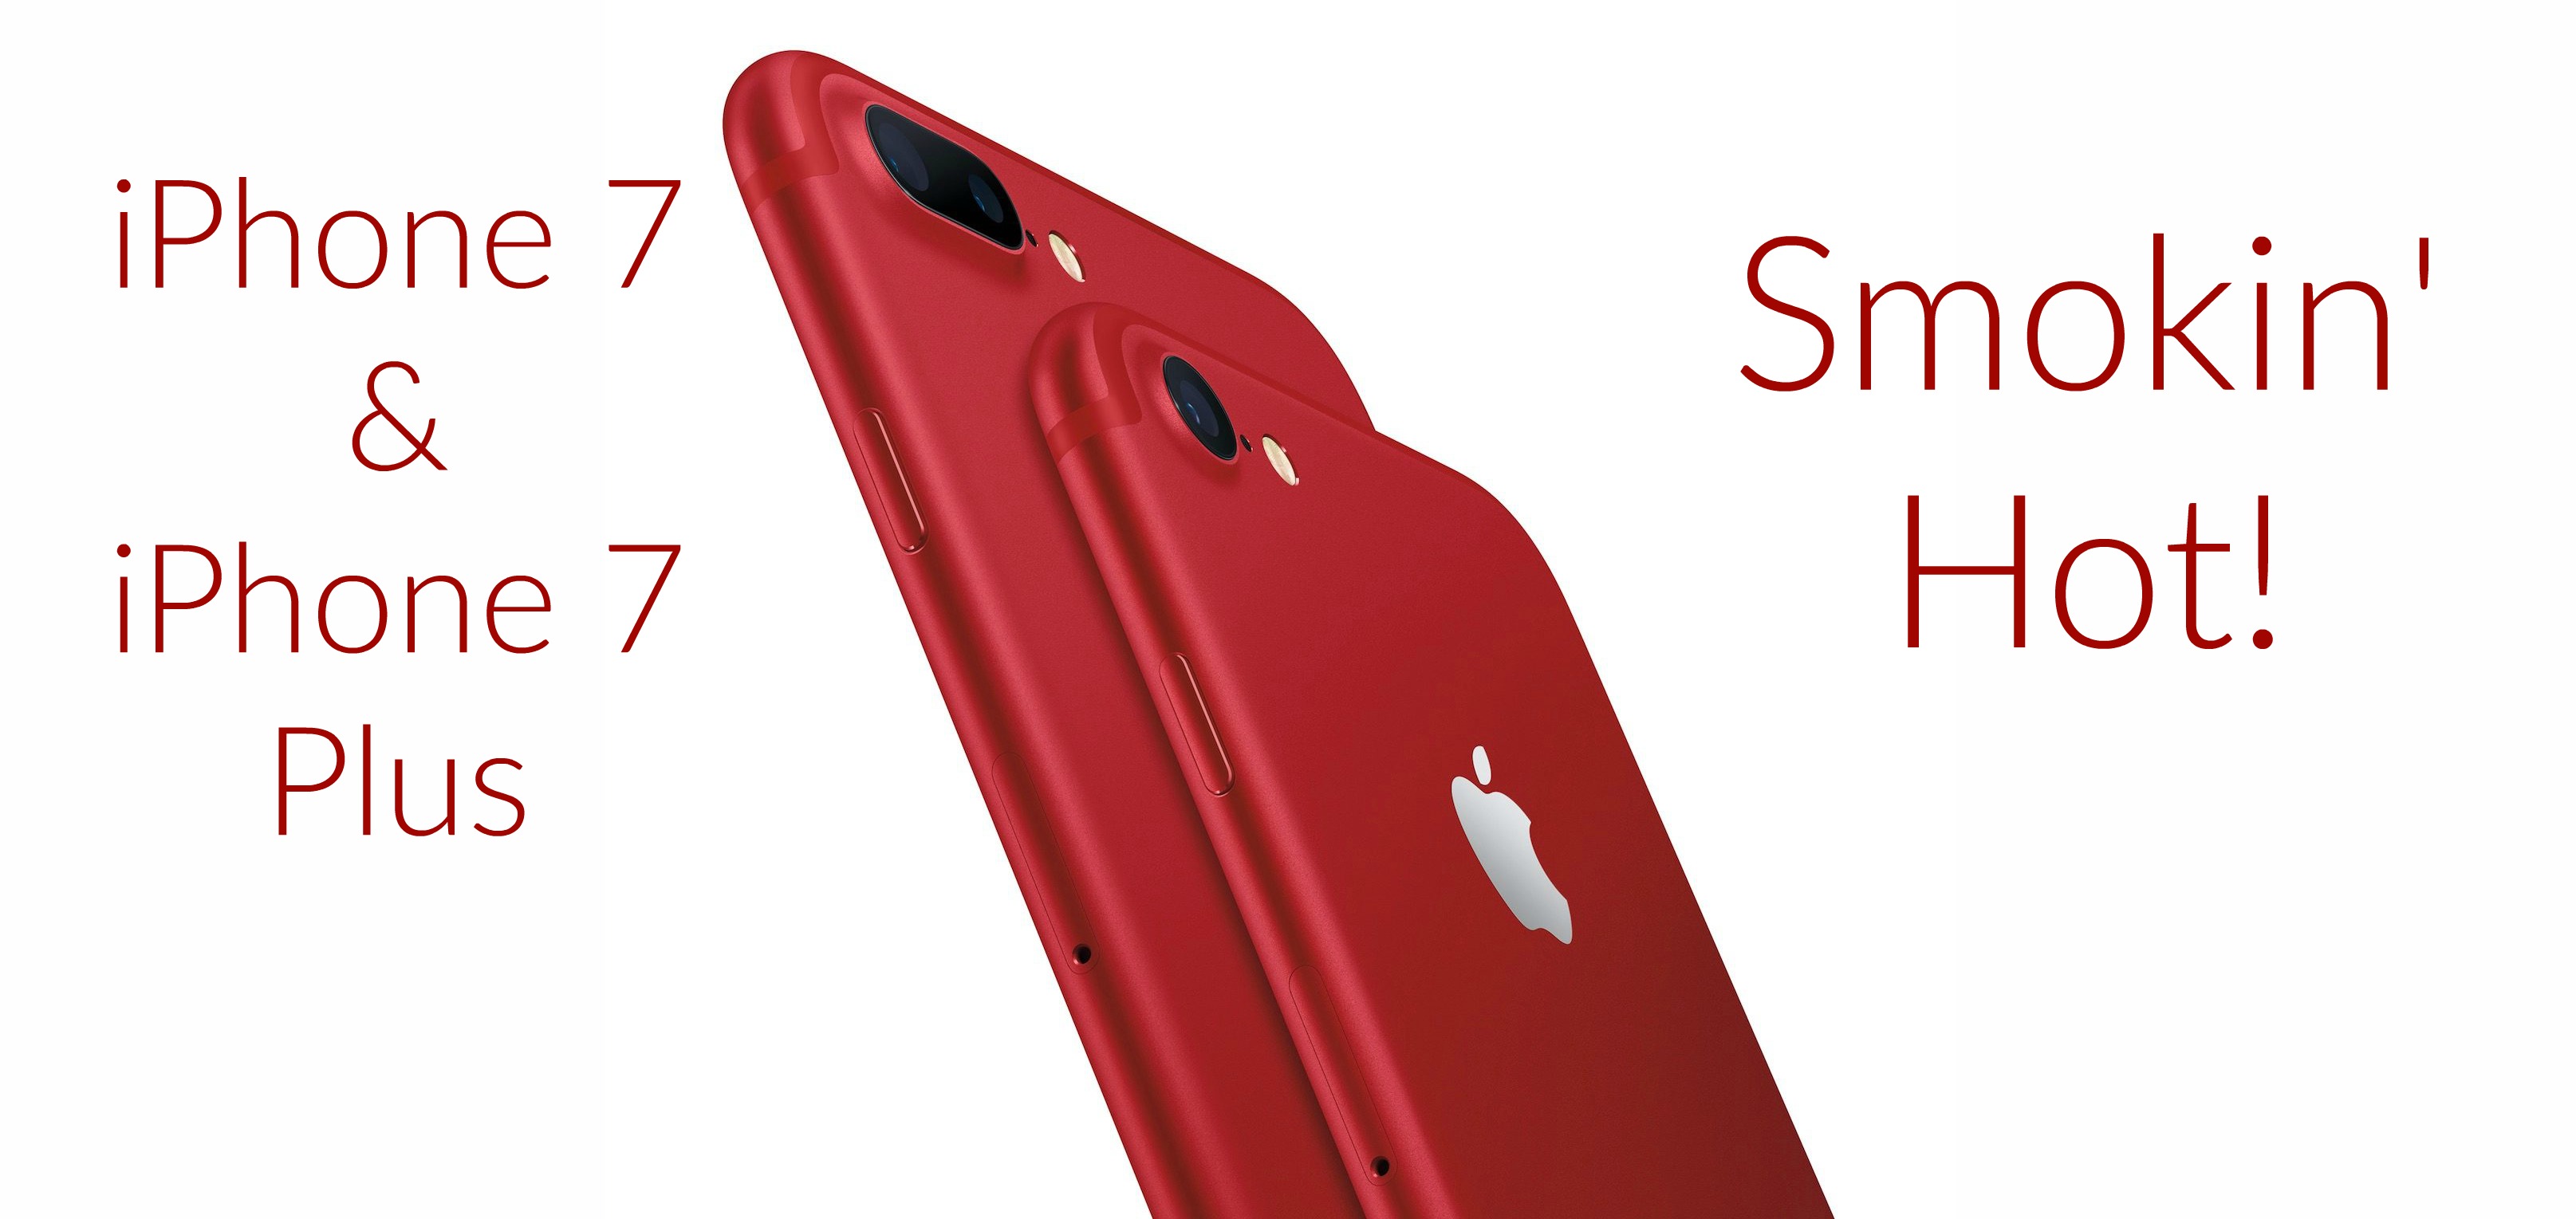 iPhone 7 in Red, iPhone,iPhone 7 is Ravishing,New iPhone 7,iPhone updates,technology news,Apple launches red iPhone 7,Apple,Red iPhone 7